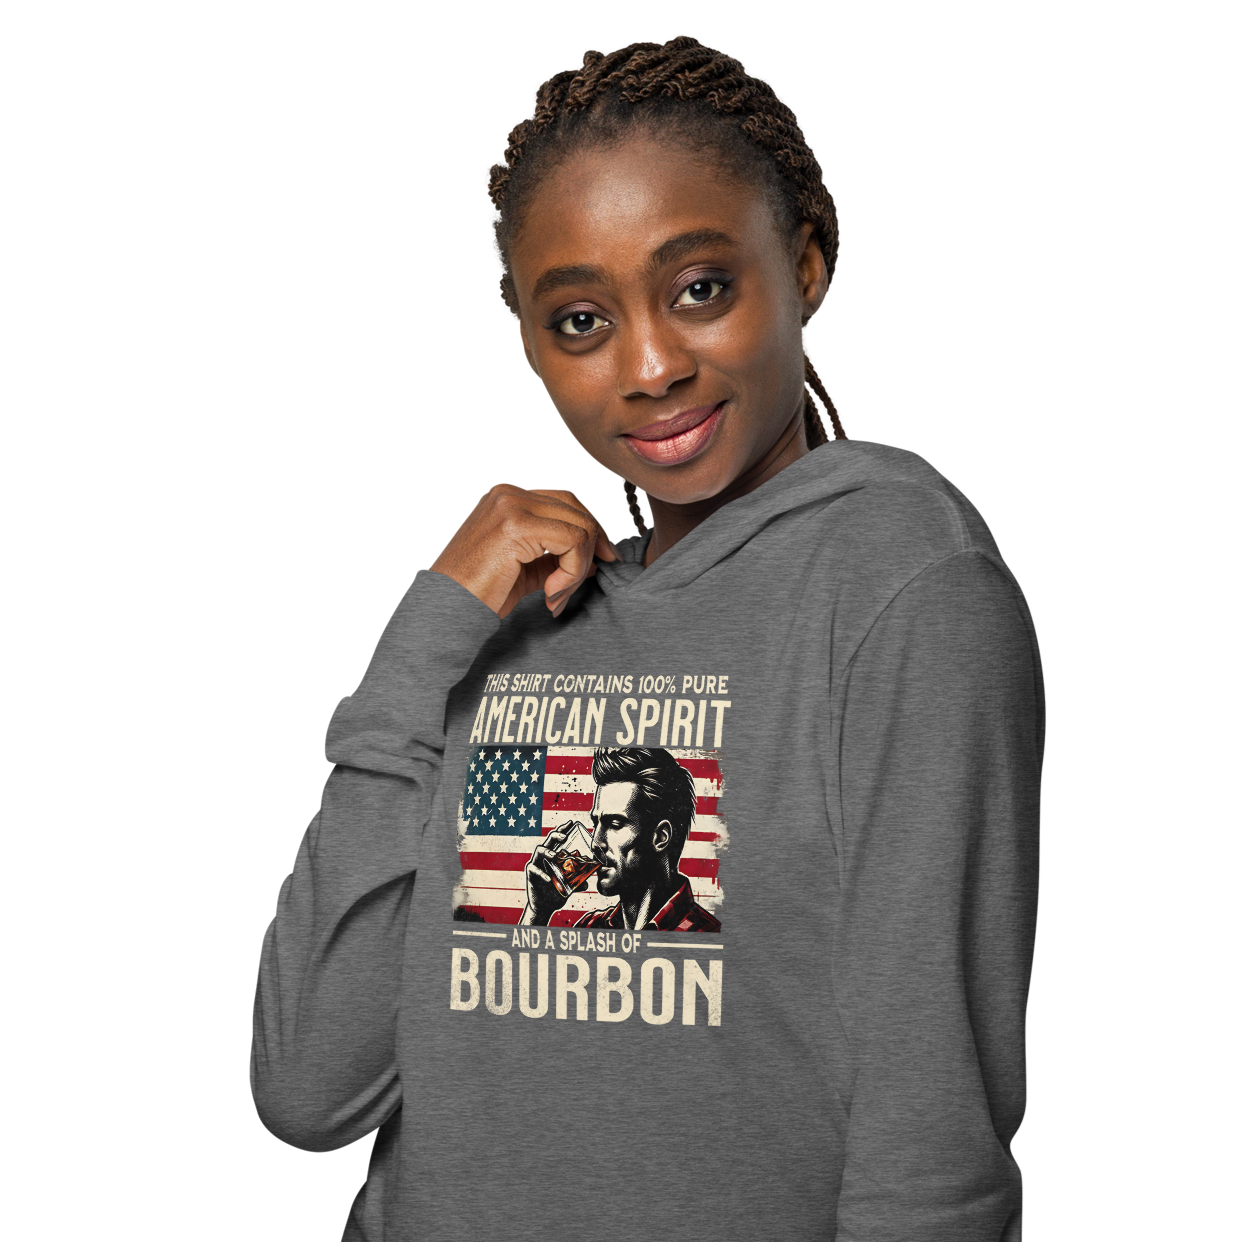 Lightweight hoodie with 'This Shirt Contains 100% American Spirit and a Splash of Bourbon' text, man drinking a glass of bourbon, and distressed American flag background.